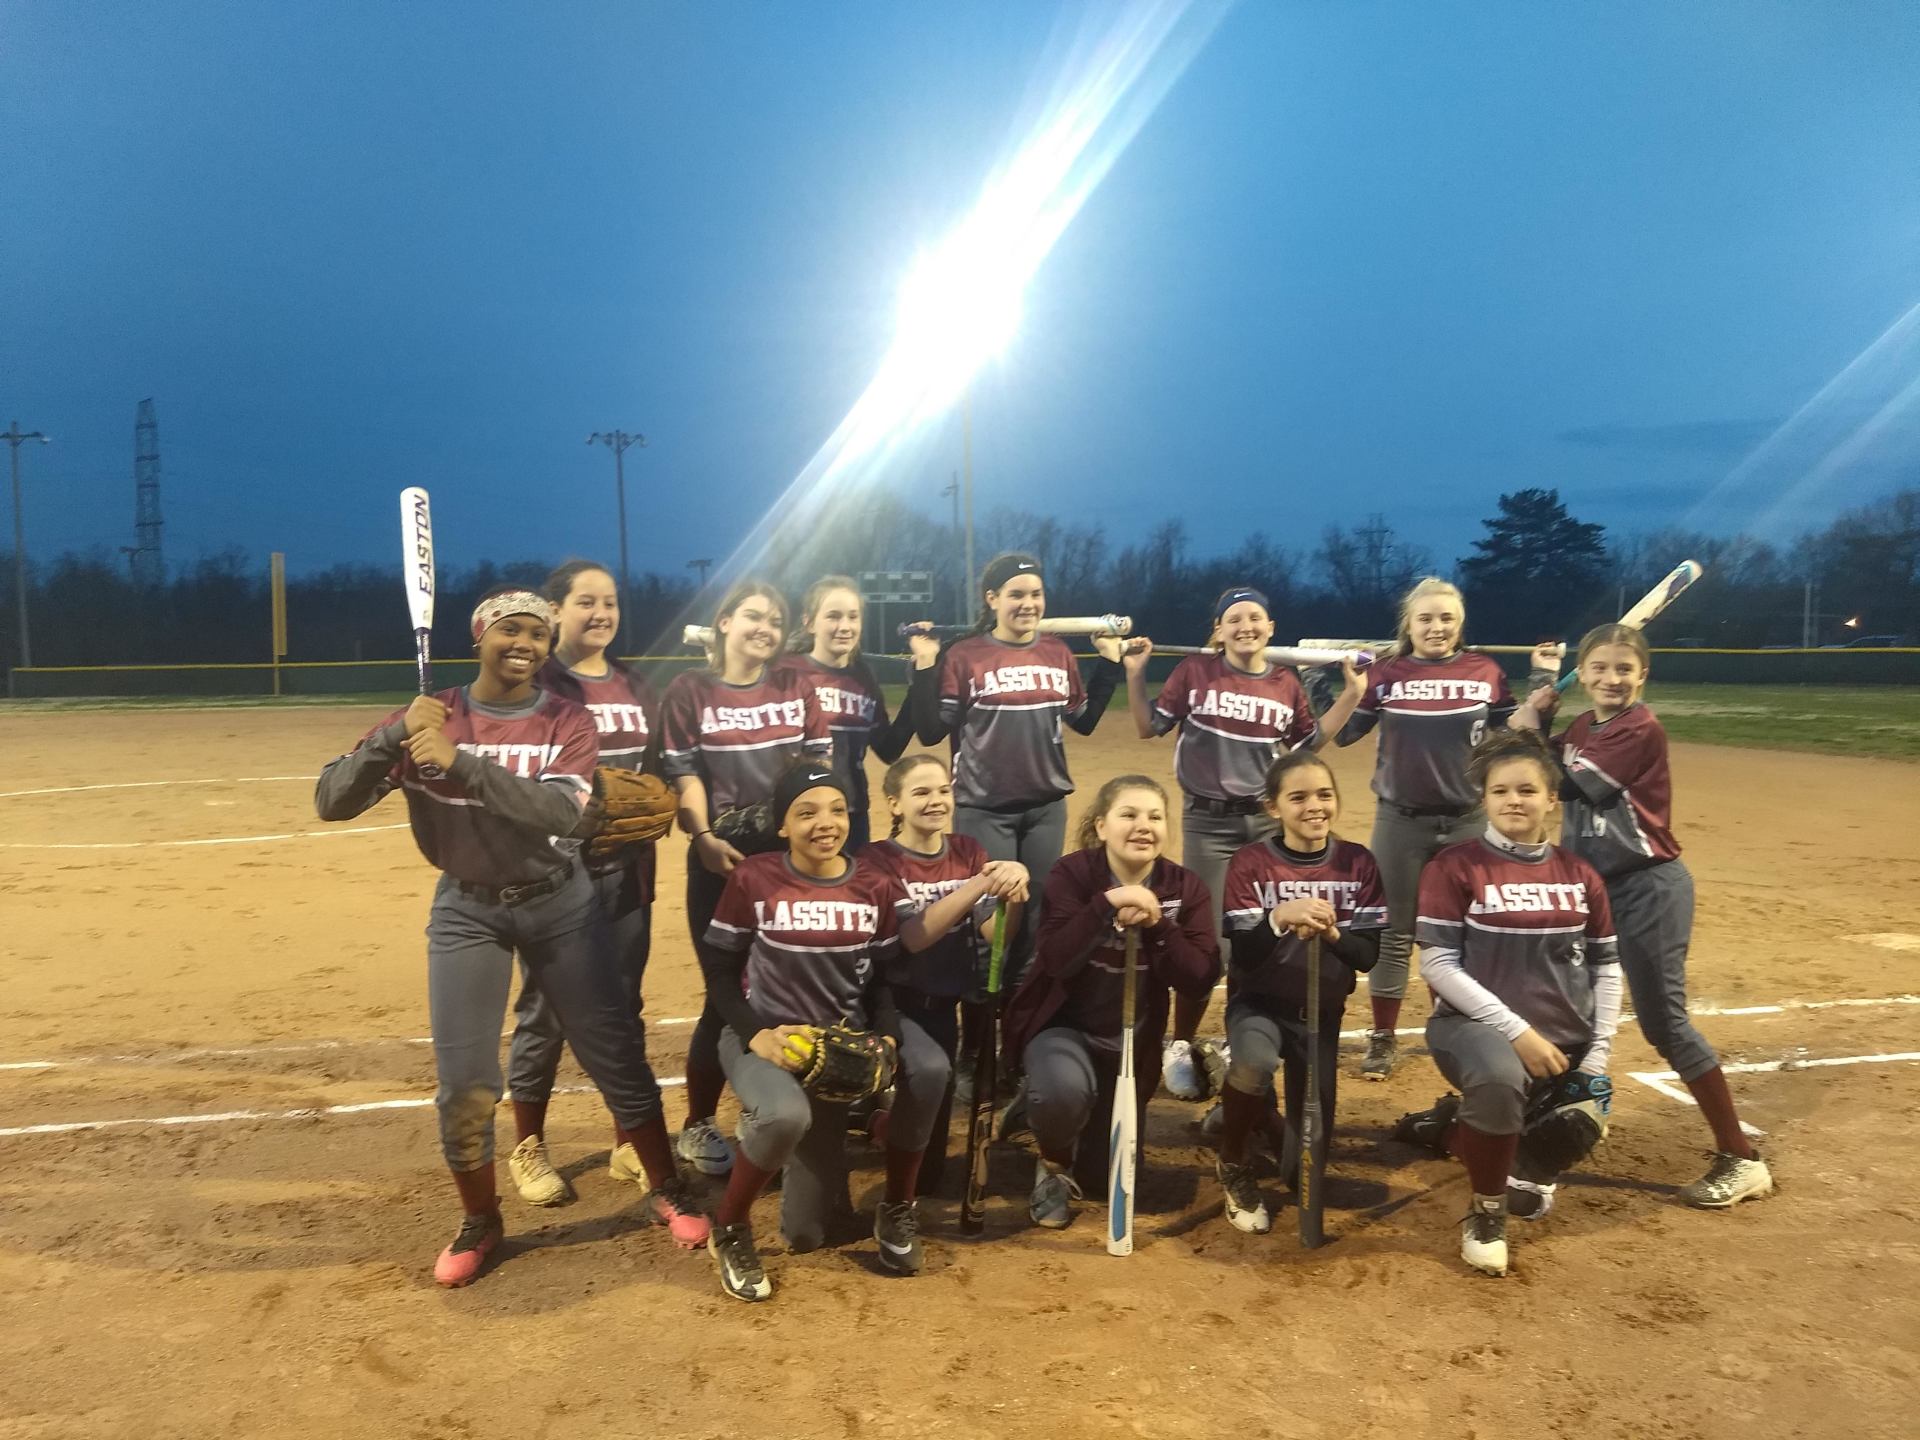 a group of softball players are posing for a picture on a field .